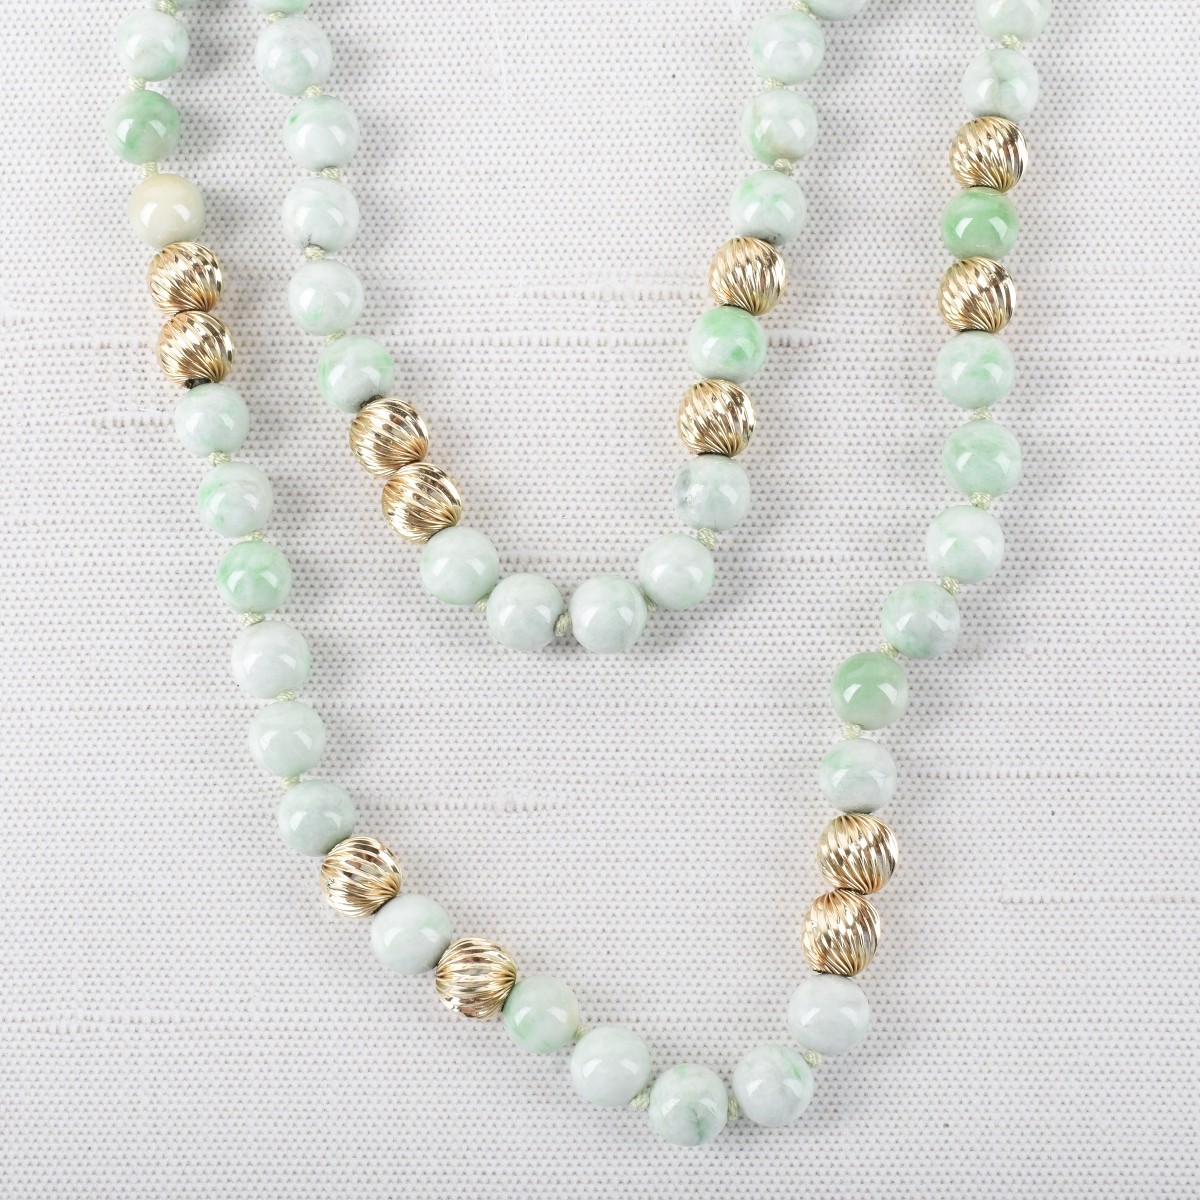 Jade and 14K Necklace